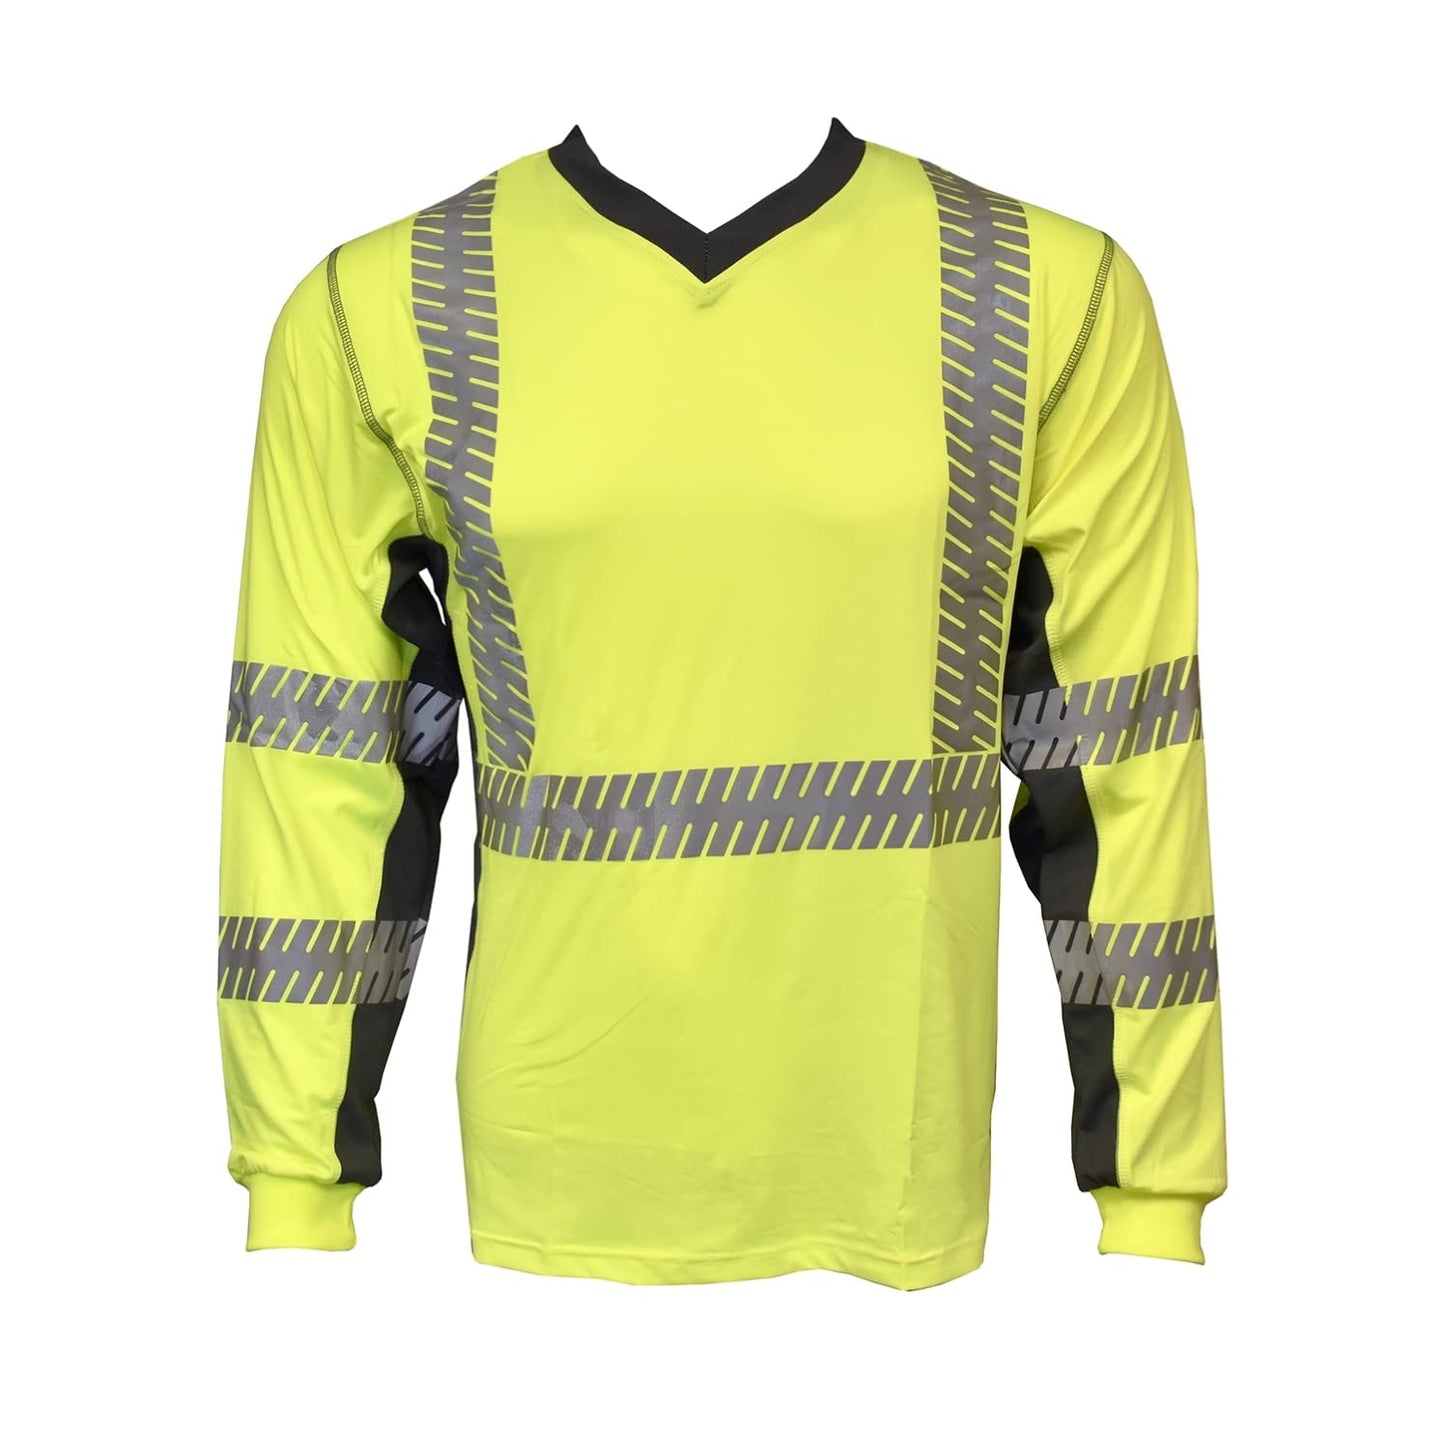 Type R, Class III, High-Visibility T-Shirt Long Sleeves, Reflective Tape